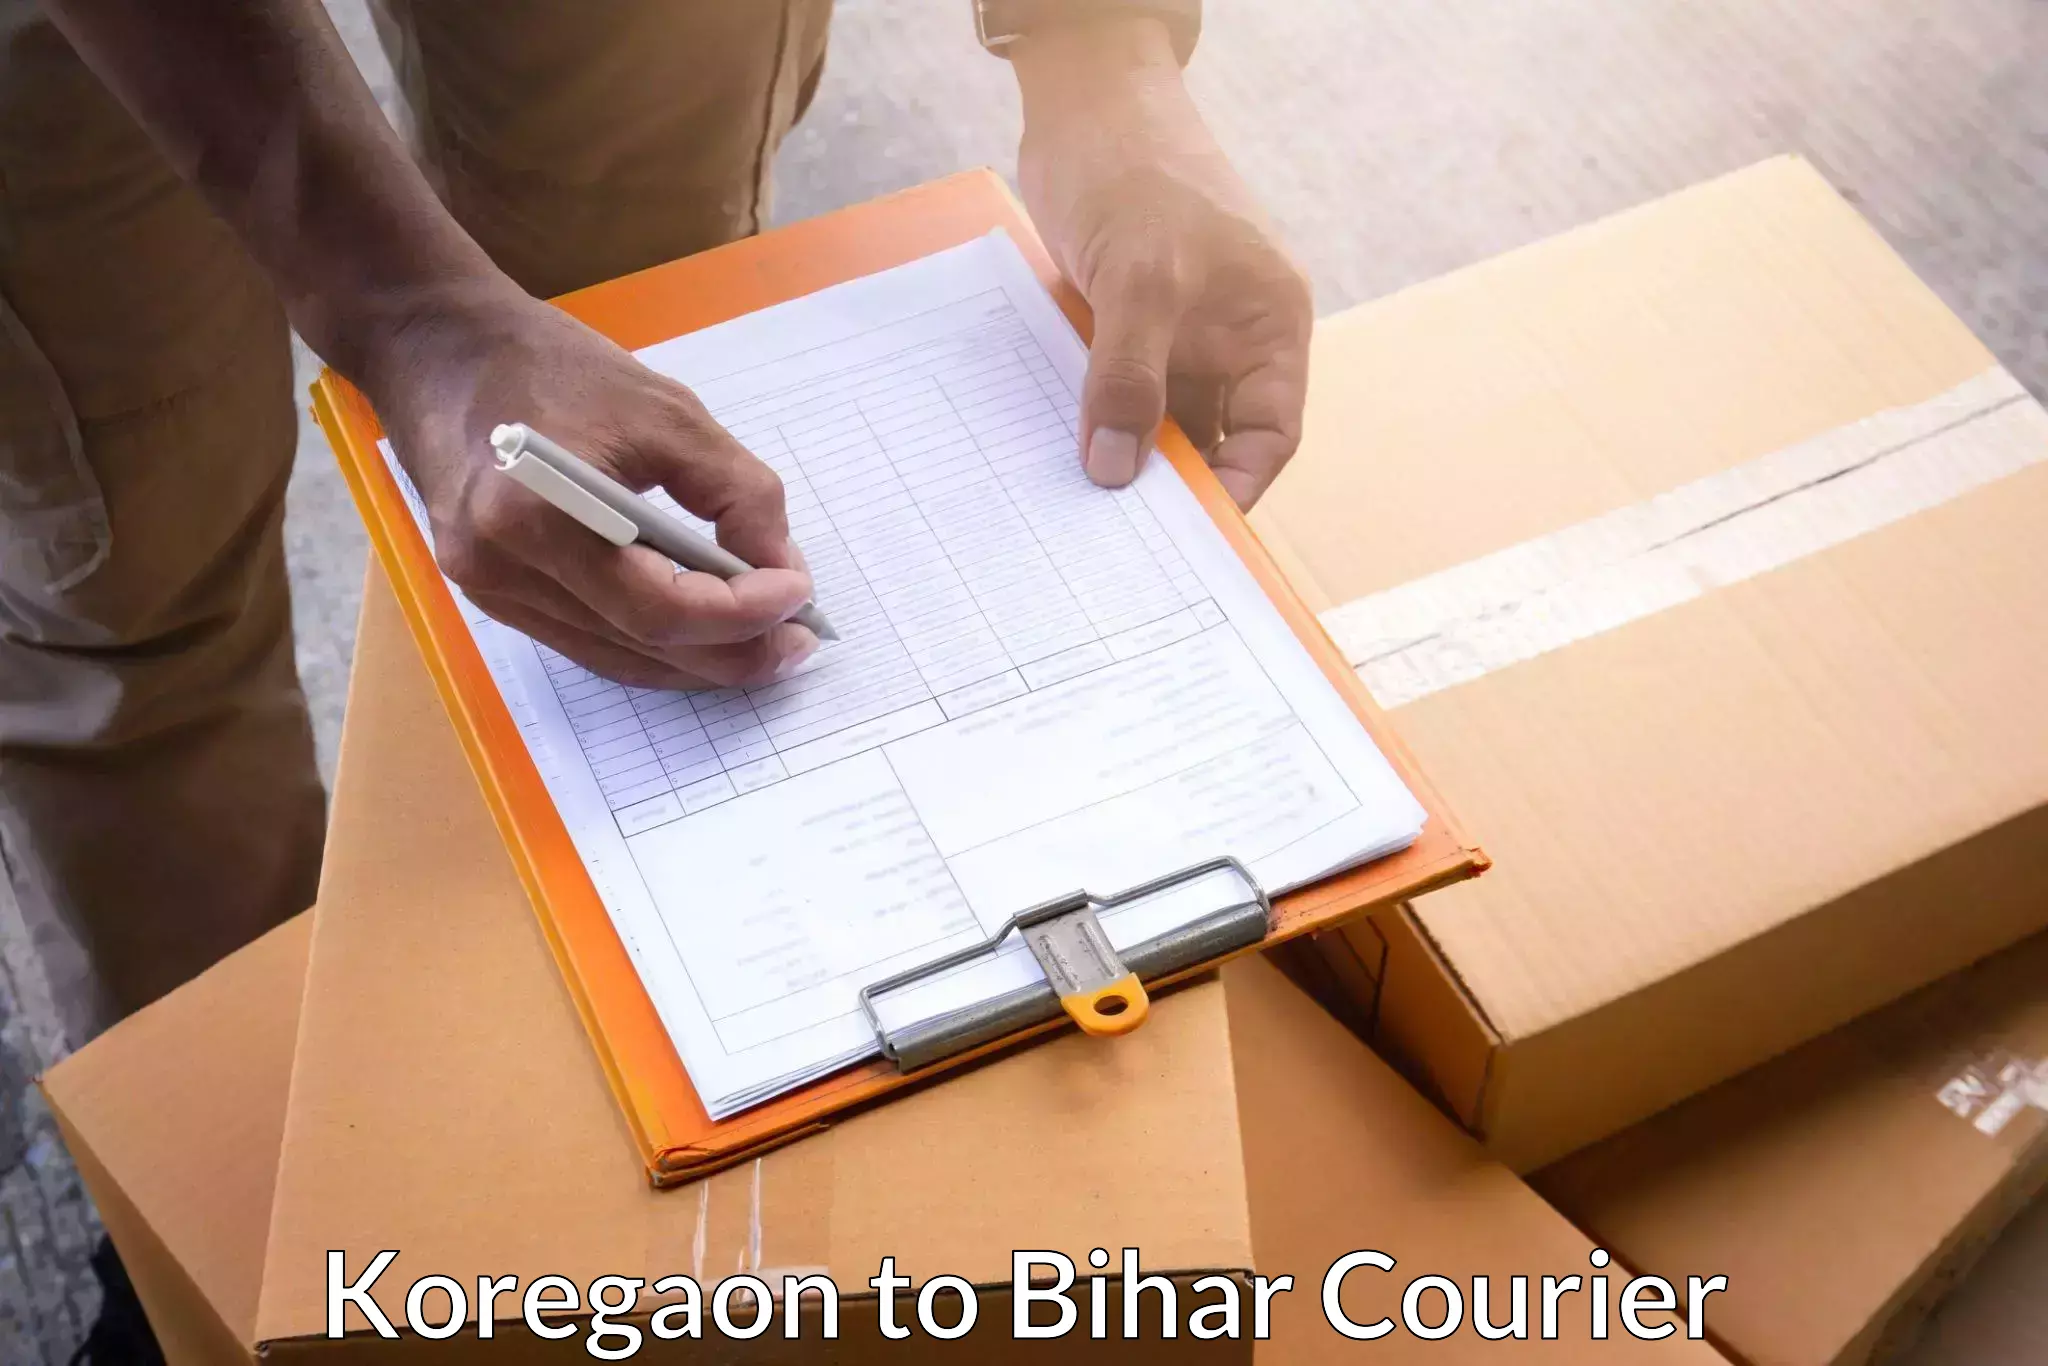 Optimized delivery routes in Koregaon to Jagdishpur Bhojpur